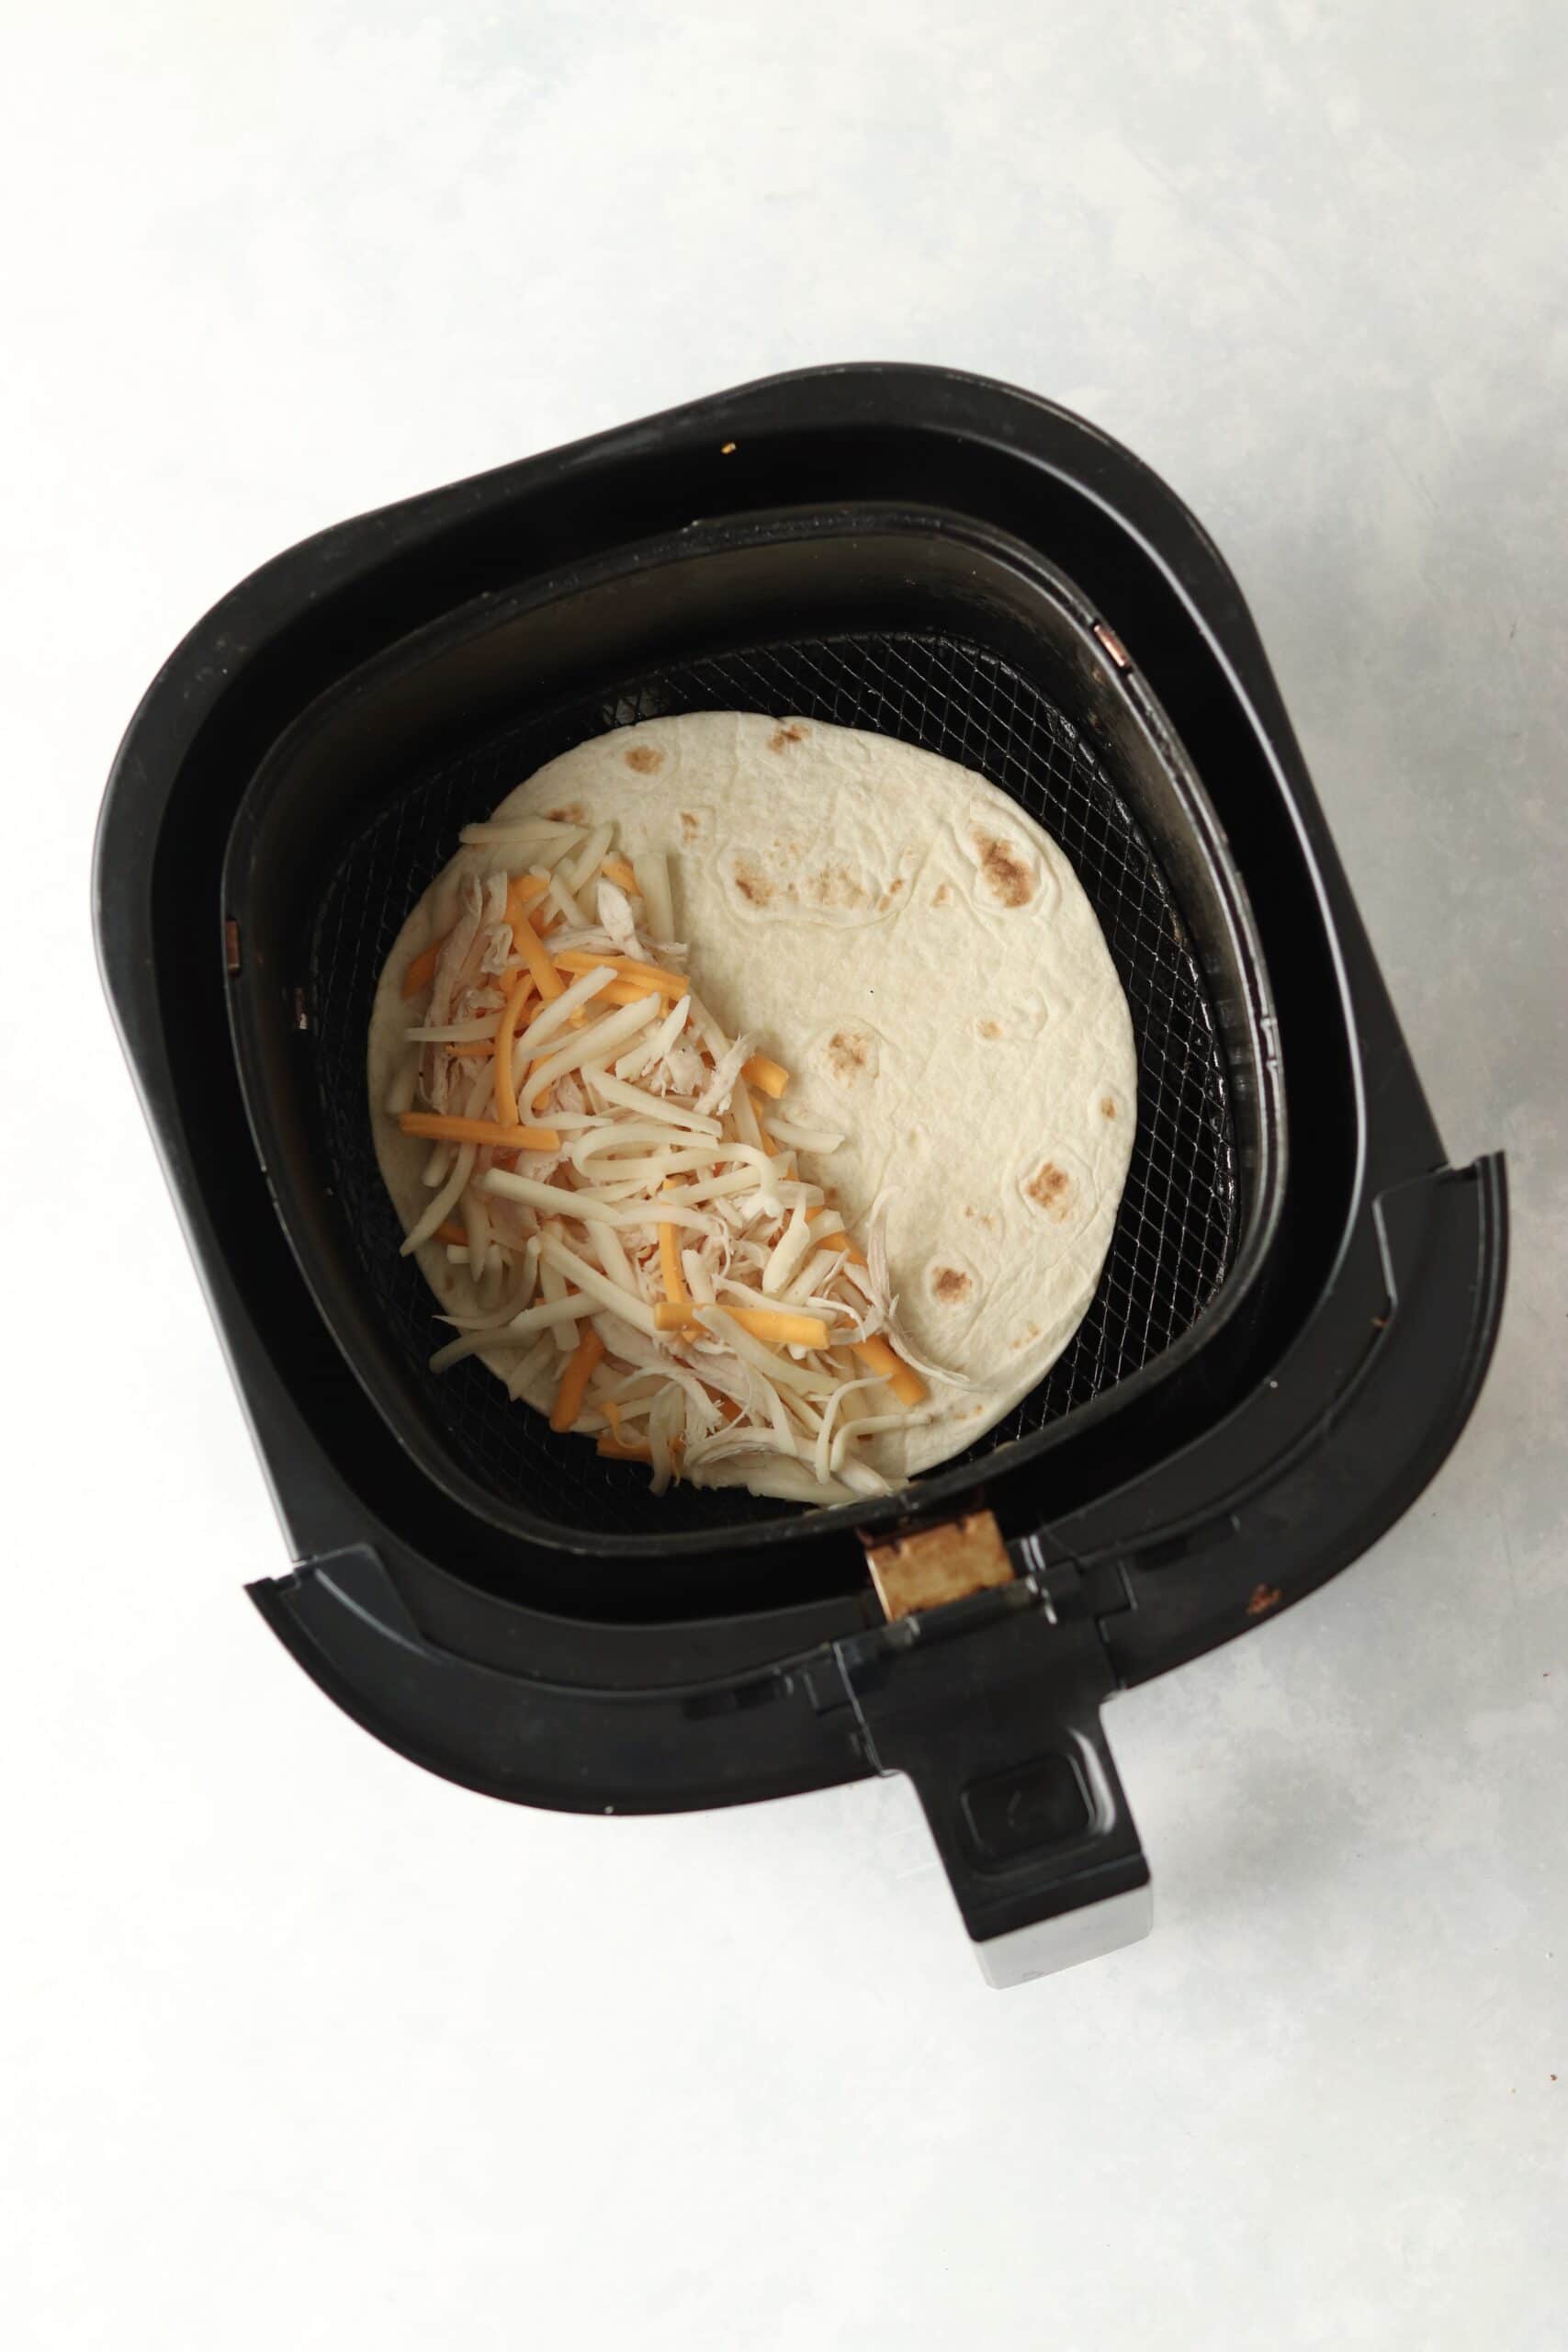 tortilla with shredded cheese in air fryer basket.